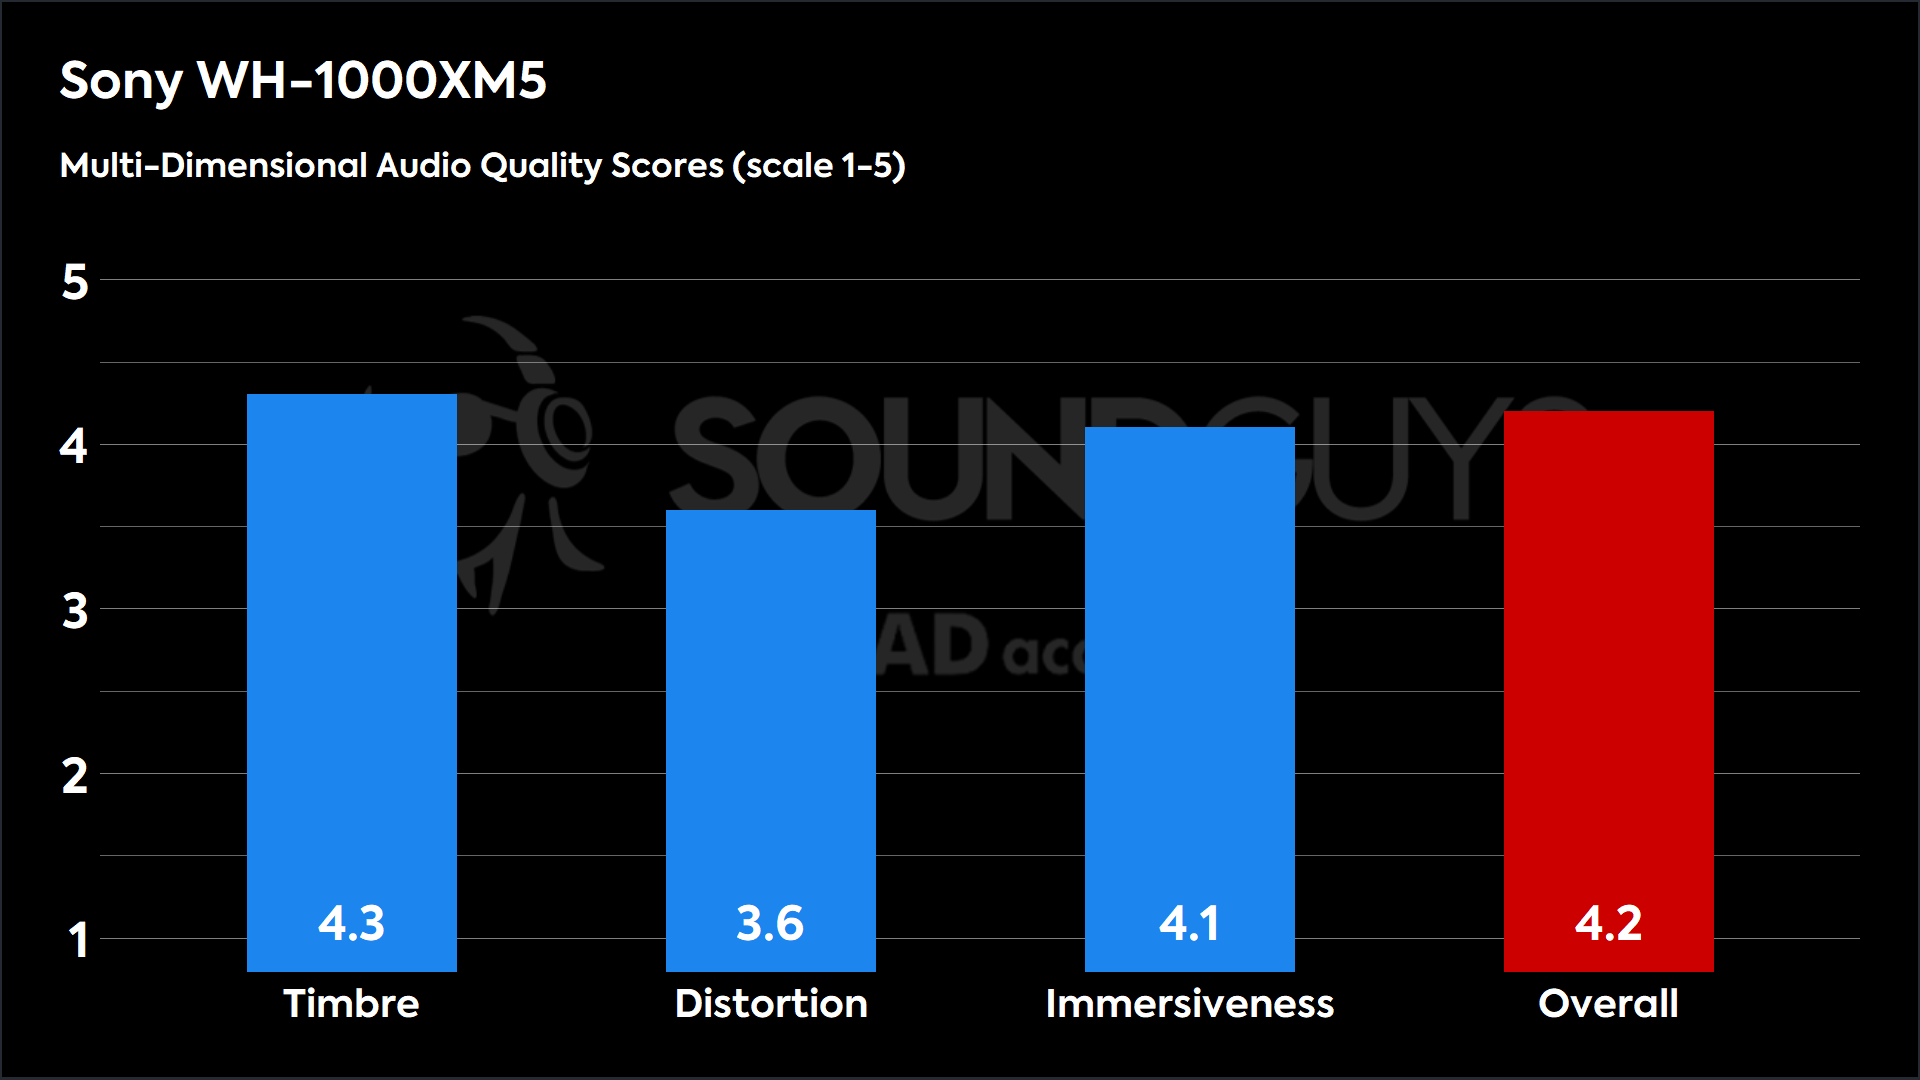 A bar chart showing how the Sony WH-1000XM5 rates in Multi-Dimensional Audio Quality Scores.